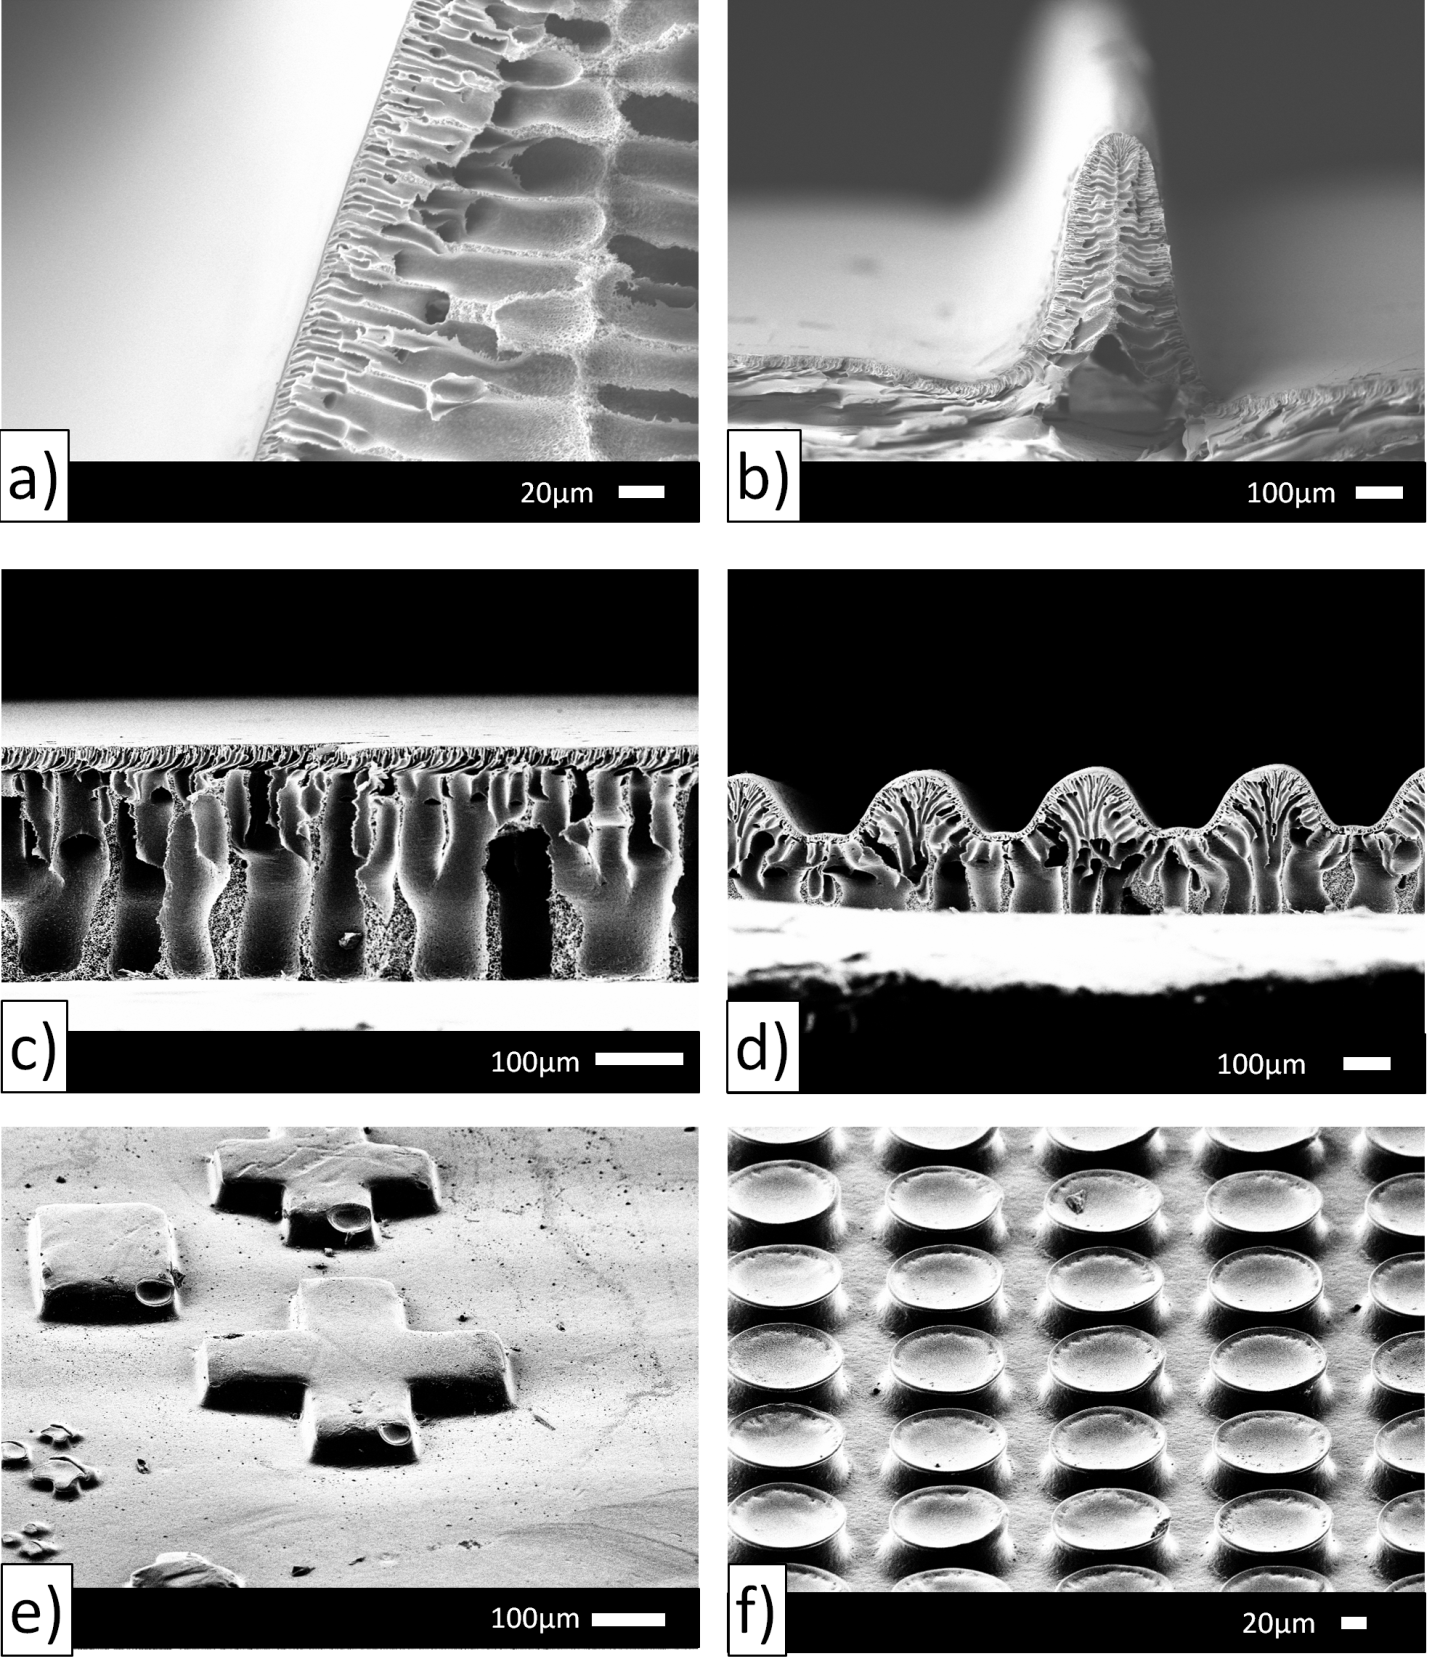 Scanning electron microscopy images of microstructured membranes for improved water filtration. The process was invented by a former student in Dr. Sameoto’s lab in collaboration with Dr. Sadrzadeh.